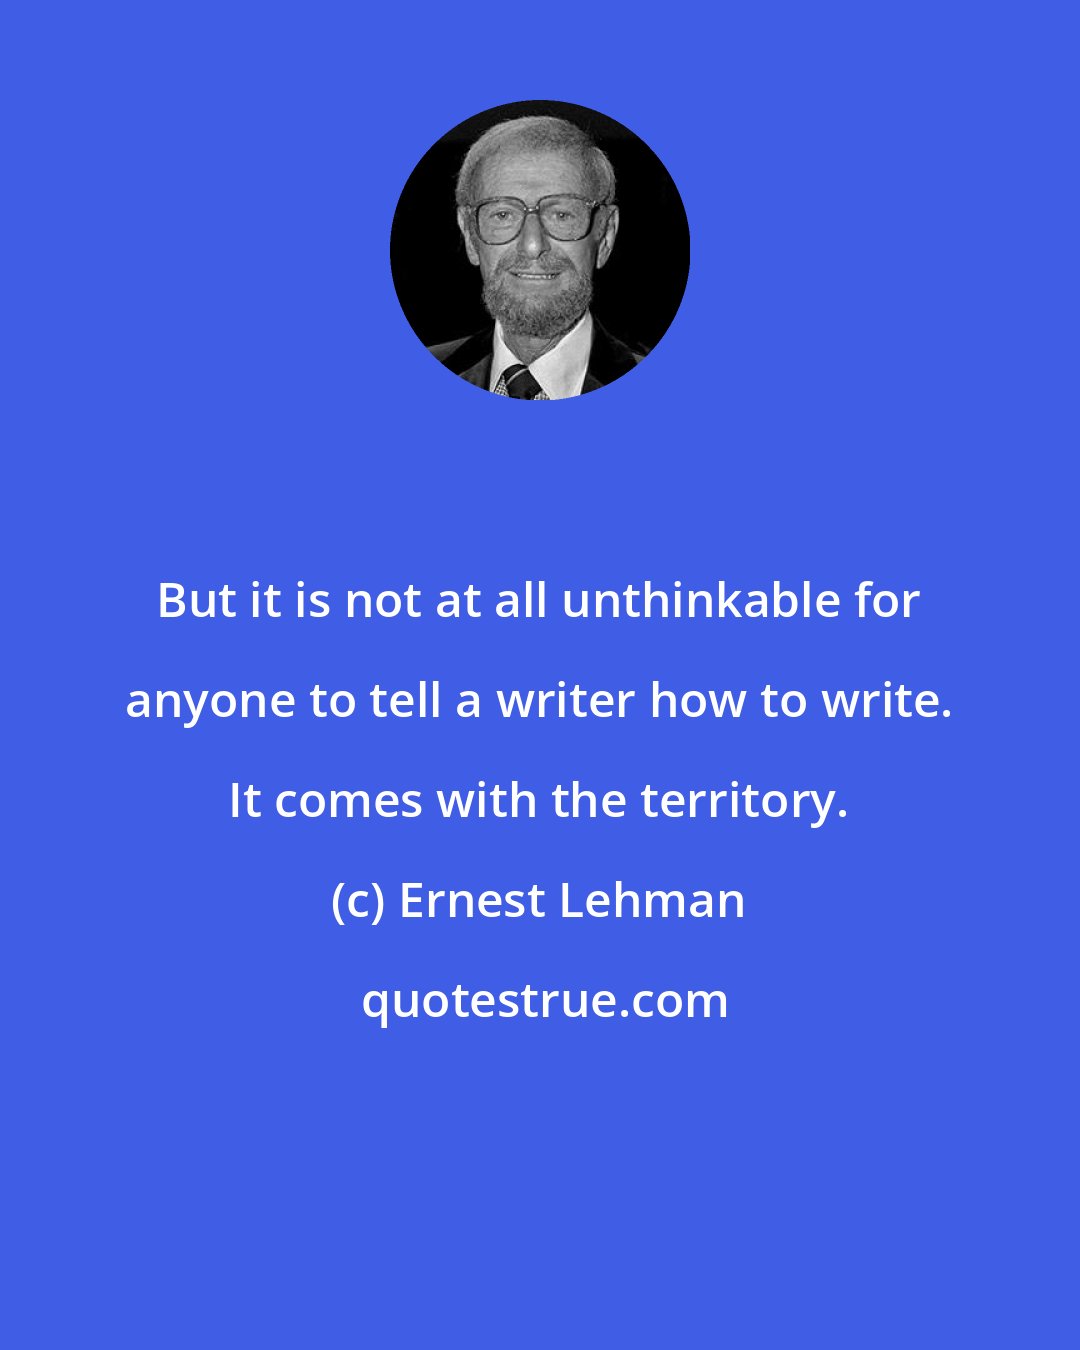 Ernest Lehman: But it is not at all unthinkable for anyone to tell a writer how to write. It comes with the territory.